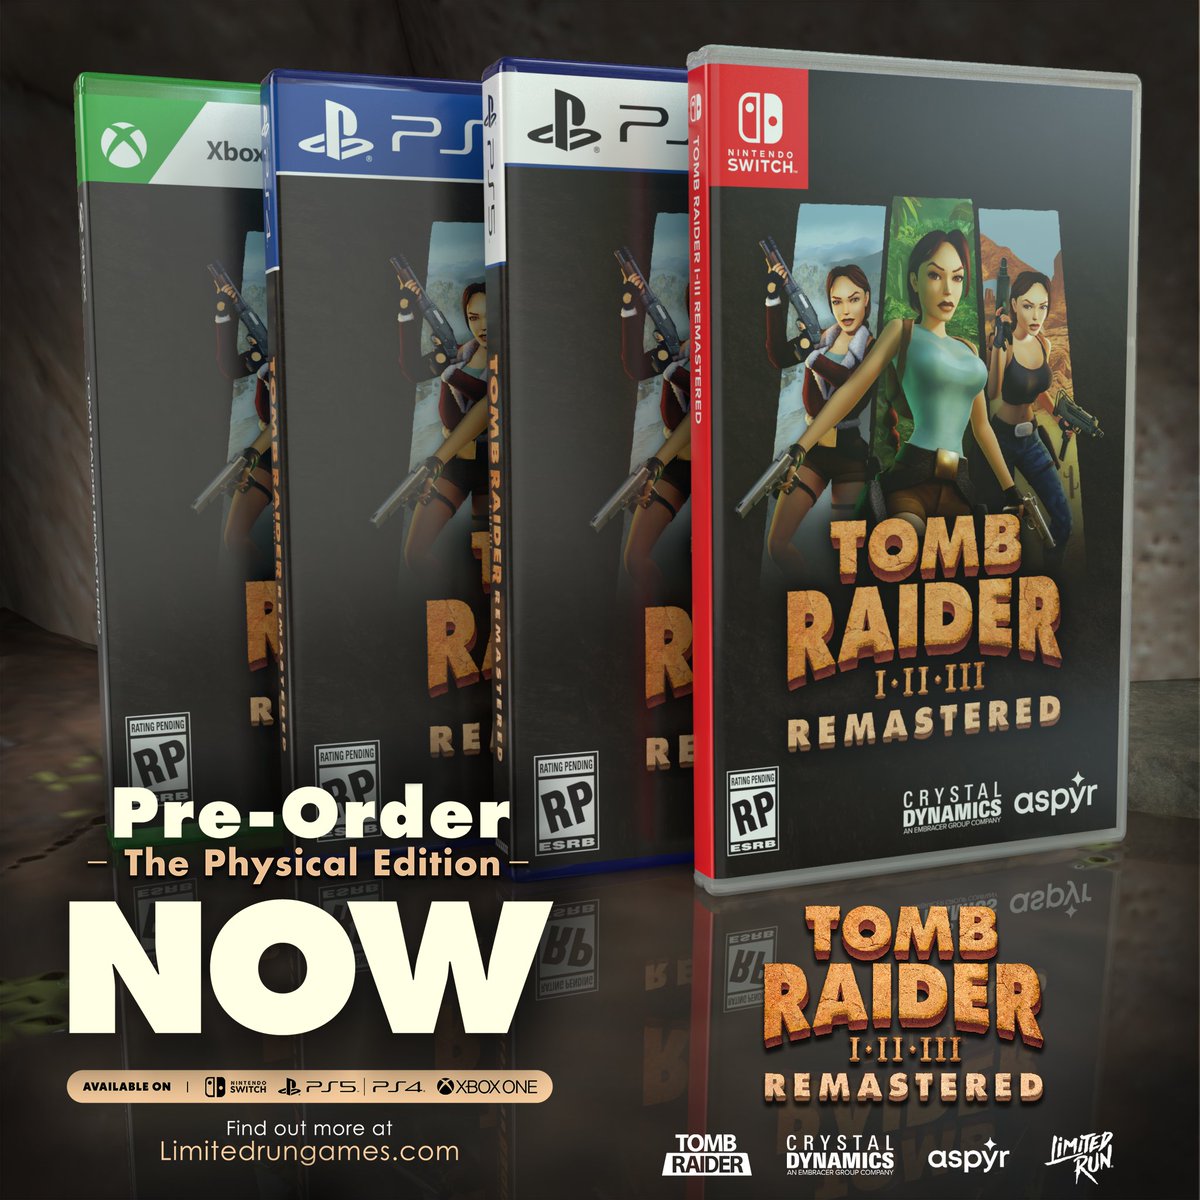 Five of Lara Croft's adventures are now up for pre-order at Limited Run! Reserve your copy of Tomb Raider I-III Remastered or The Lara Croft Collection today! 🧭Shop the full collection: limitedrungames.com/collections/lr…